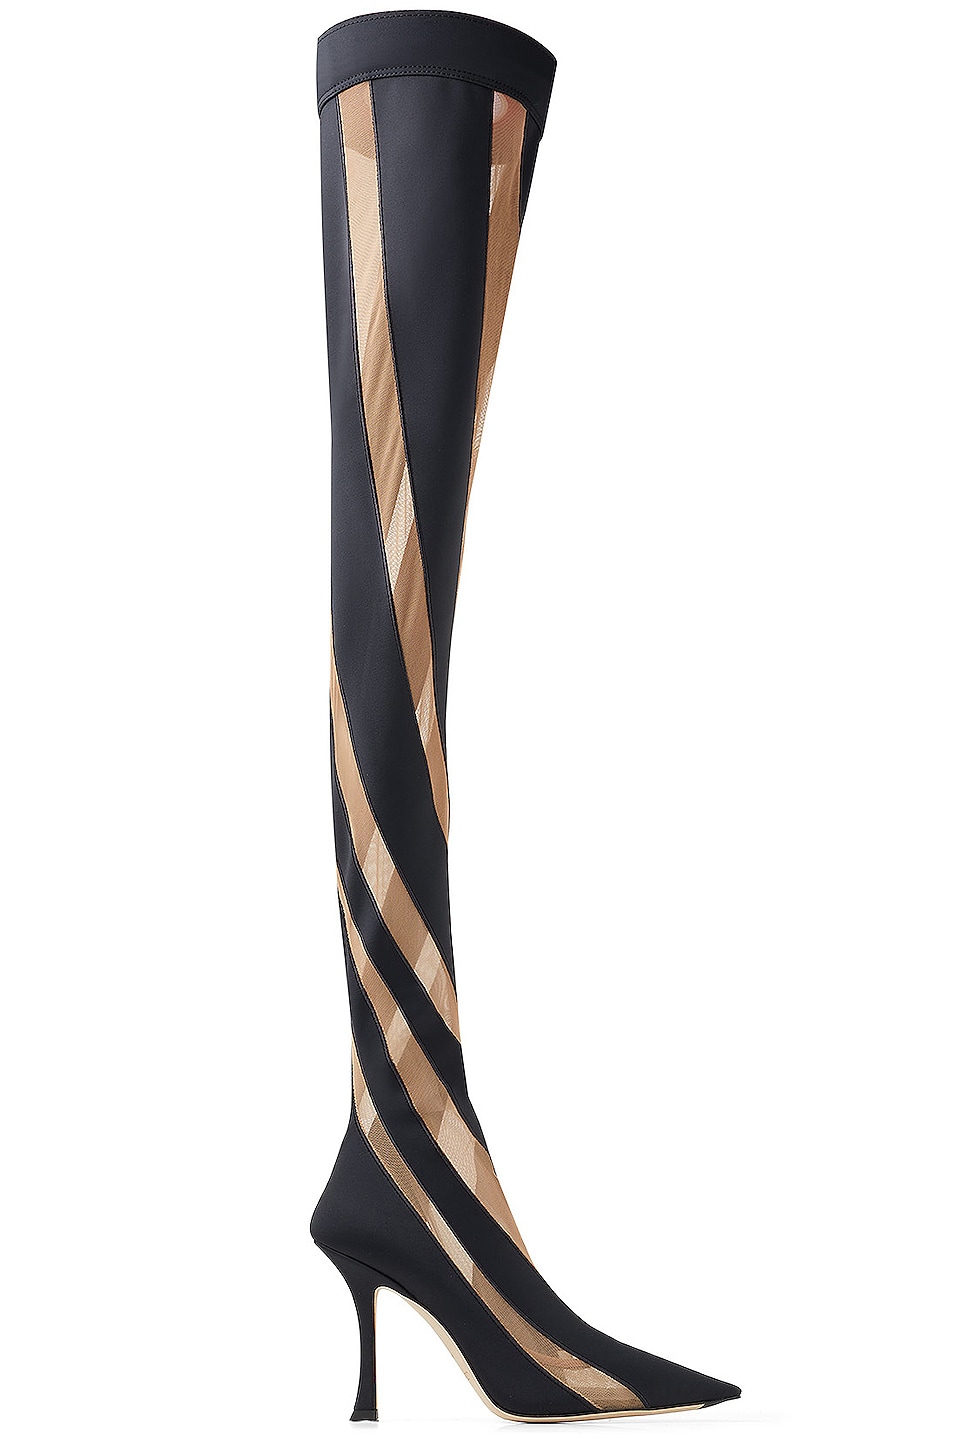 Image 1 of Jimmy Choo x Mugler Spiral Sock Over the Knee Boot in Black & Nude